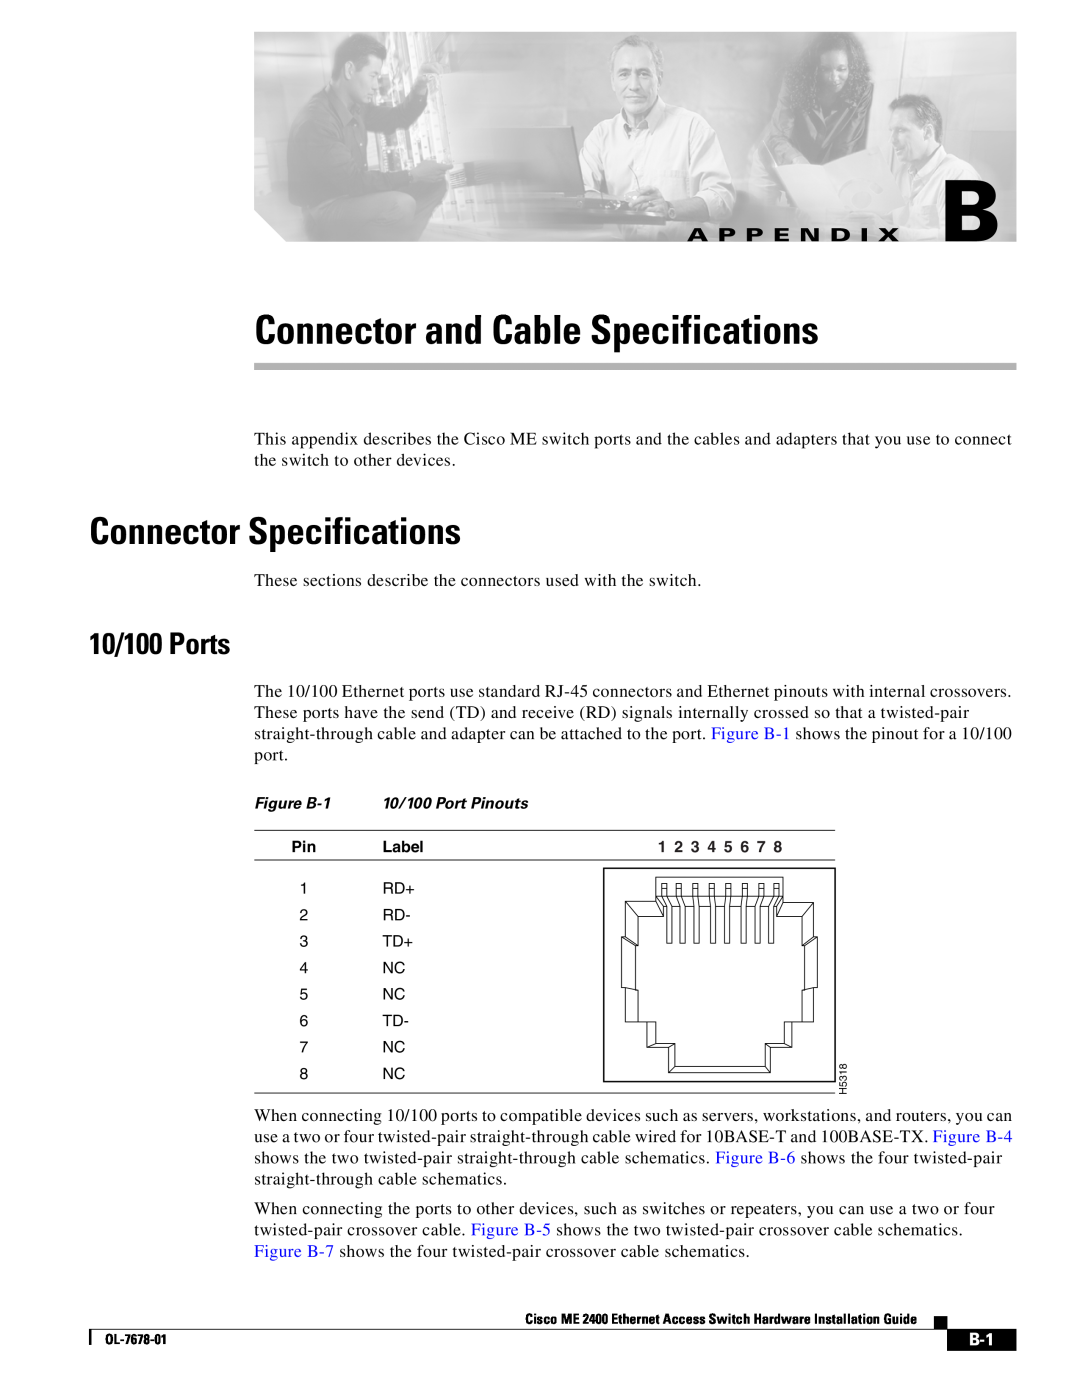 Cisco Systems ME 2400 manual Connector and Cable Specifications, Connector Specifications, A P P E N D I X B, 10/100 Ports 